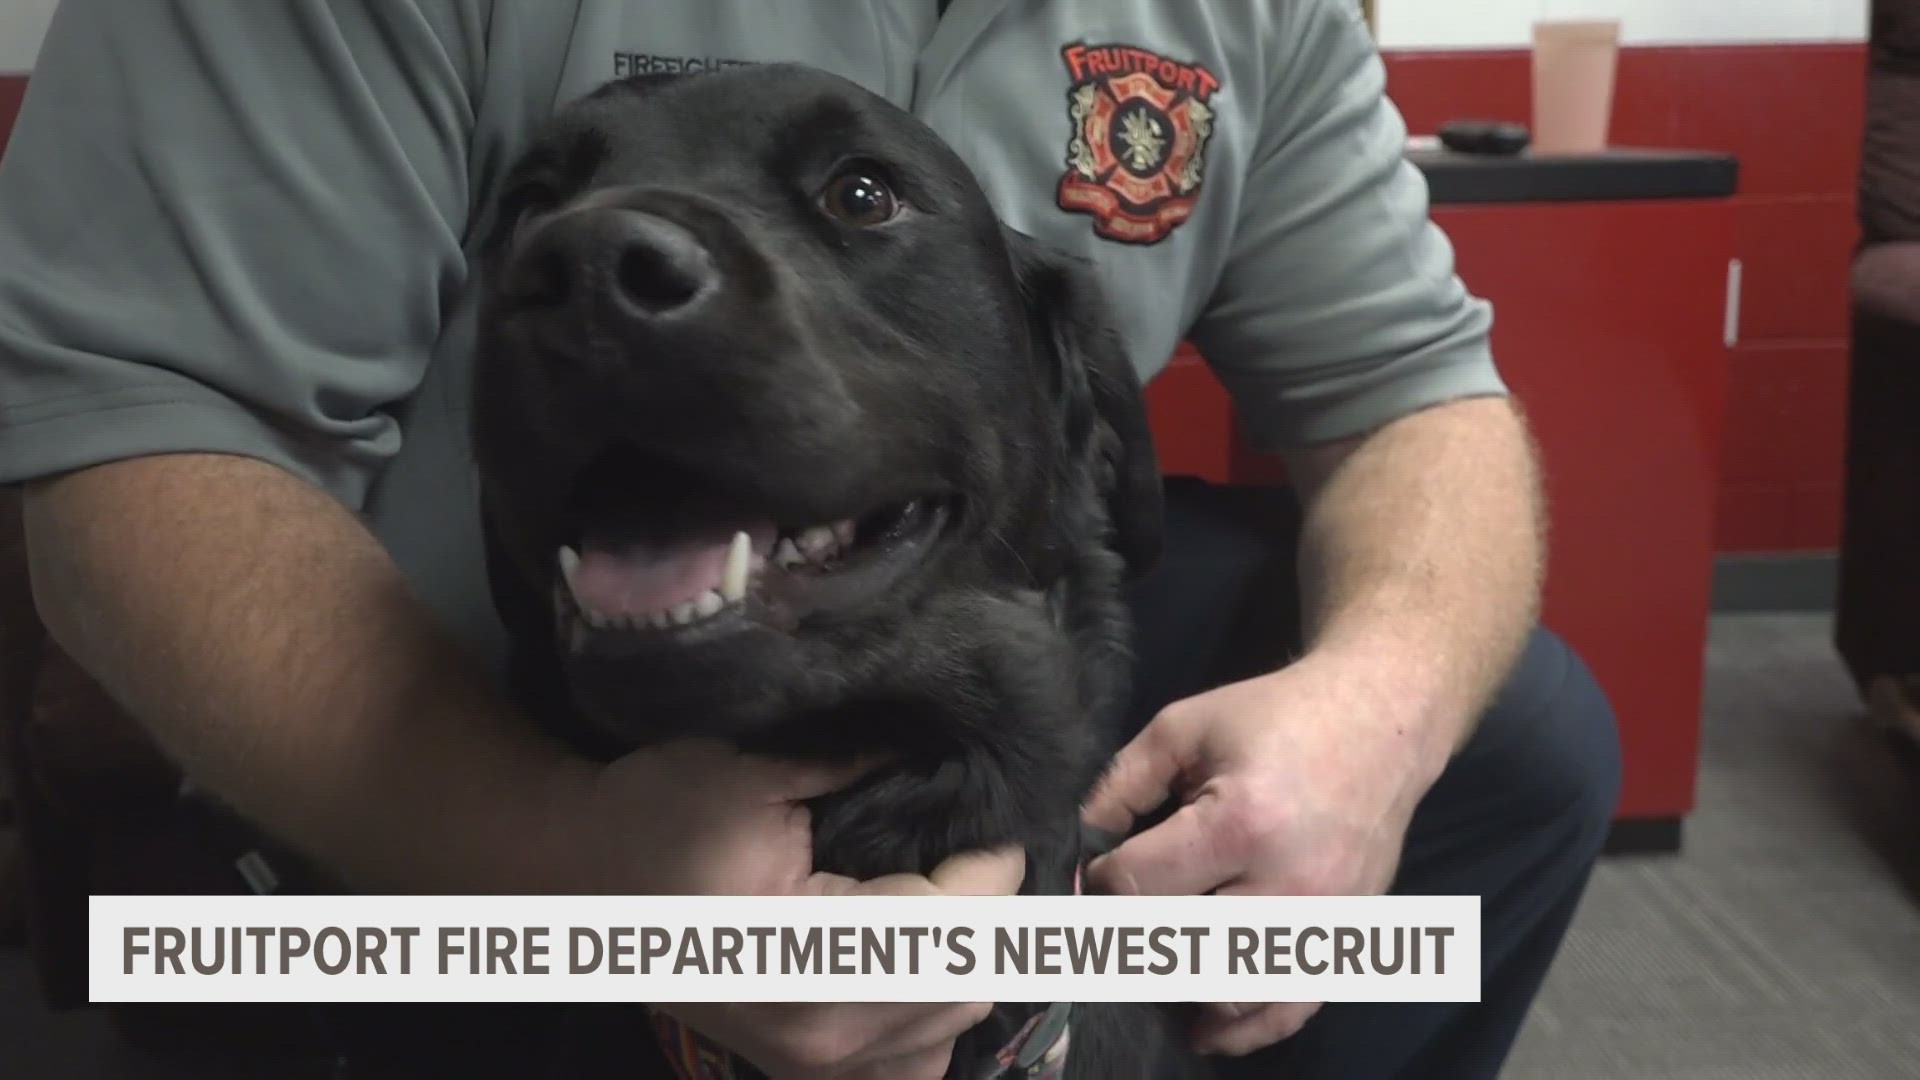 The Fruitport Fire Department has a new recruit that's ready to help.